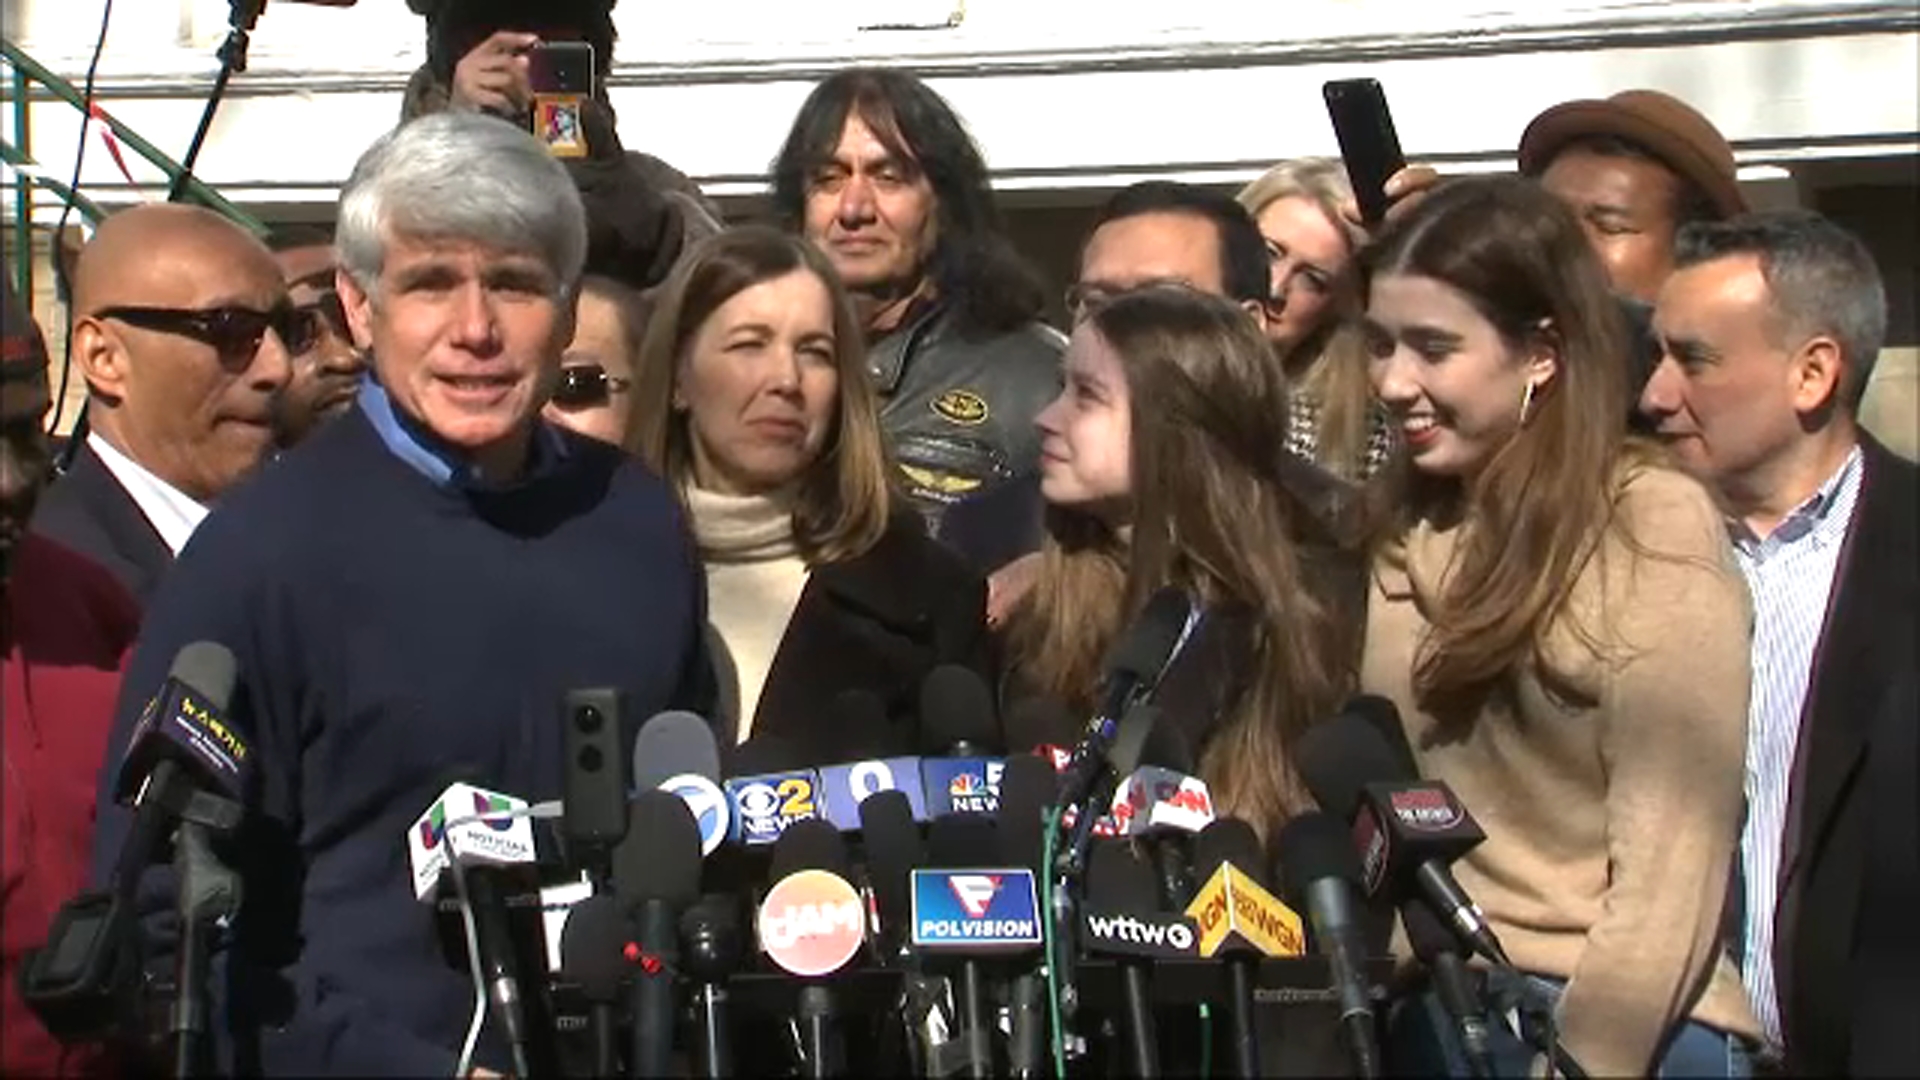 Patricia and her husband Rod Blagojevich with their two daughters